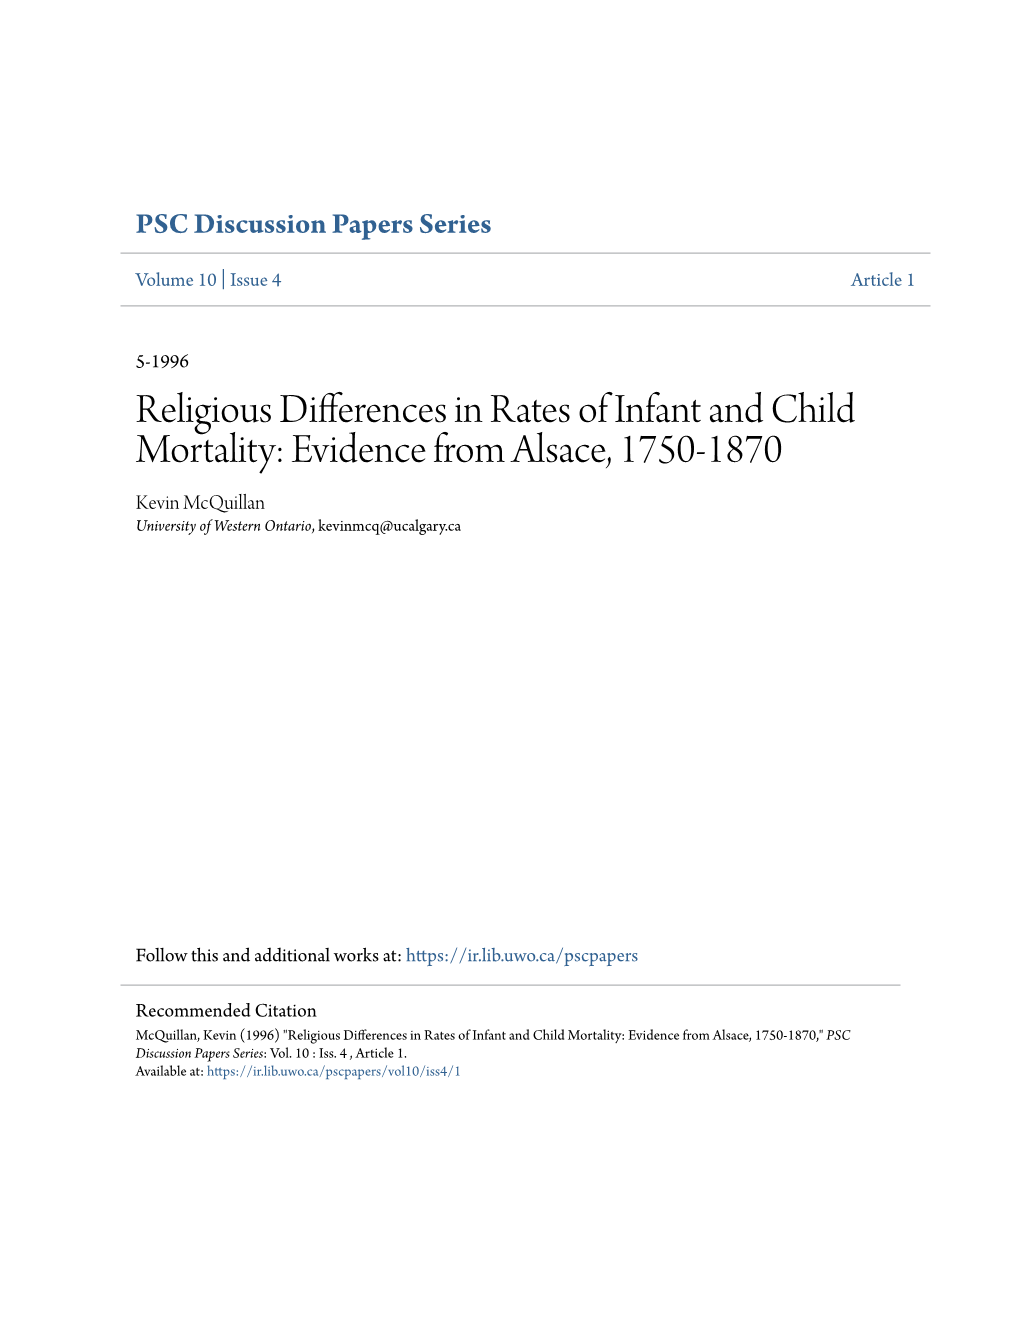 Religious Differences in Rates of Infant and Child Mortality: Evidence from Alsace, 1750-1870 Kevin Mcquillan University of Western Ontario, Kevinmcq@Ucalgary.Ca